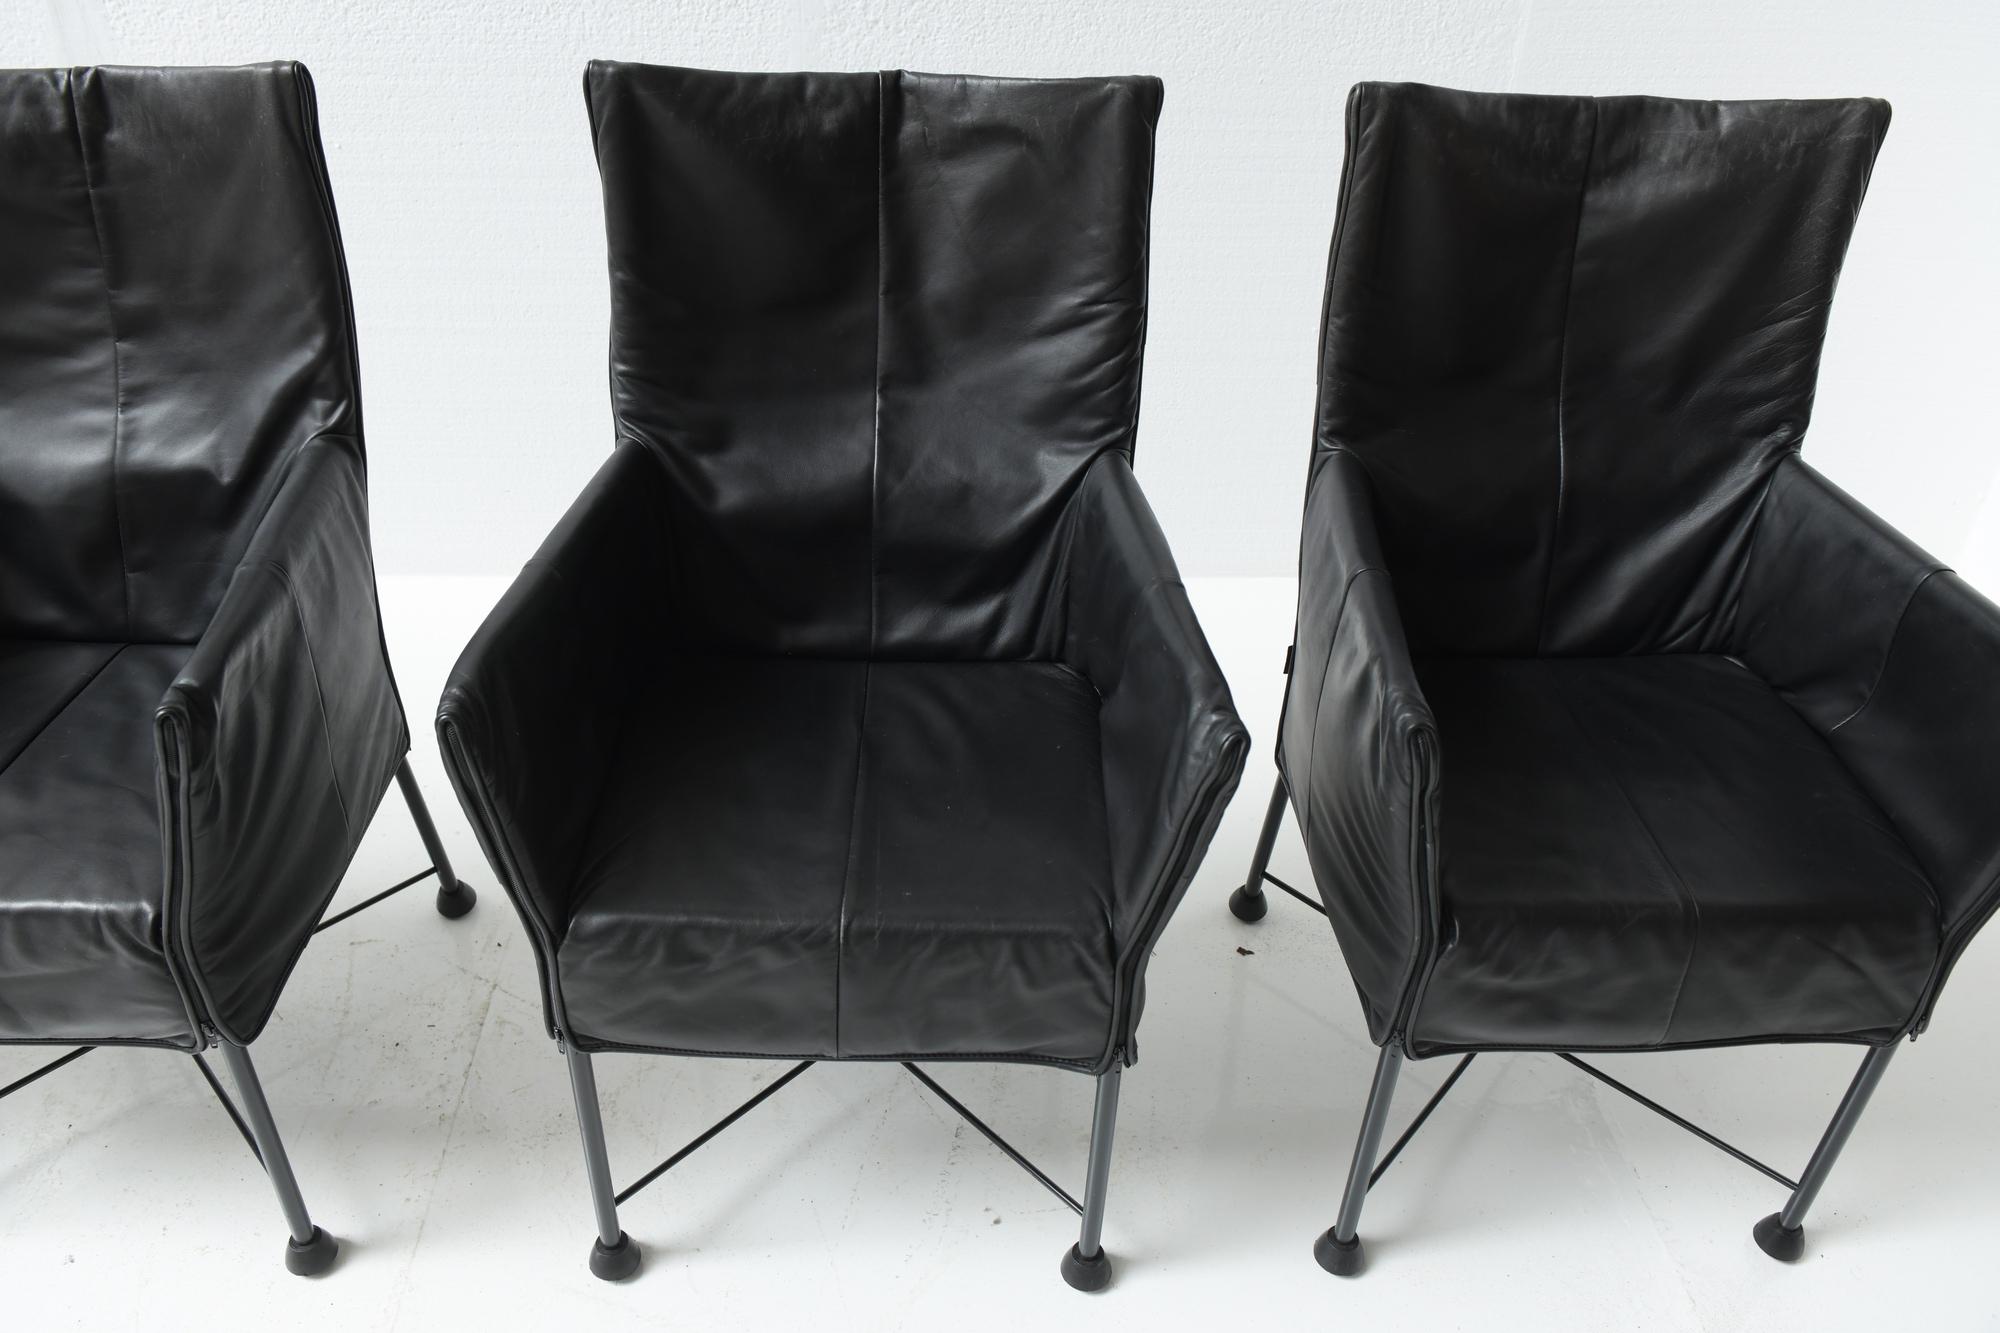 6 x Chaplin Vintage Leather Dining Chairs by Gerard van den Berg for Montis For Sale 8